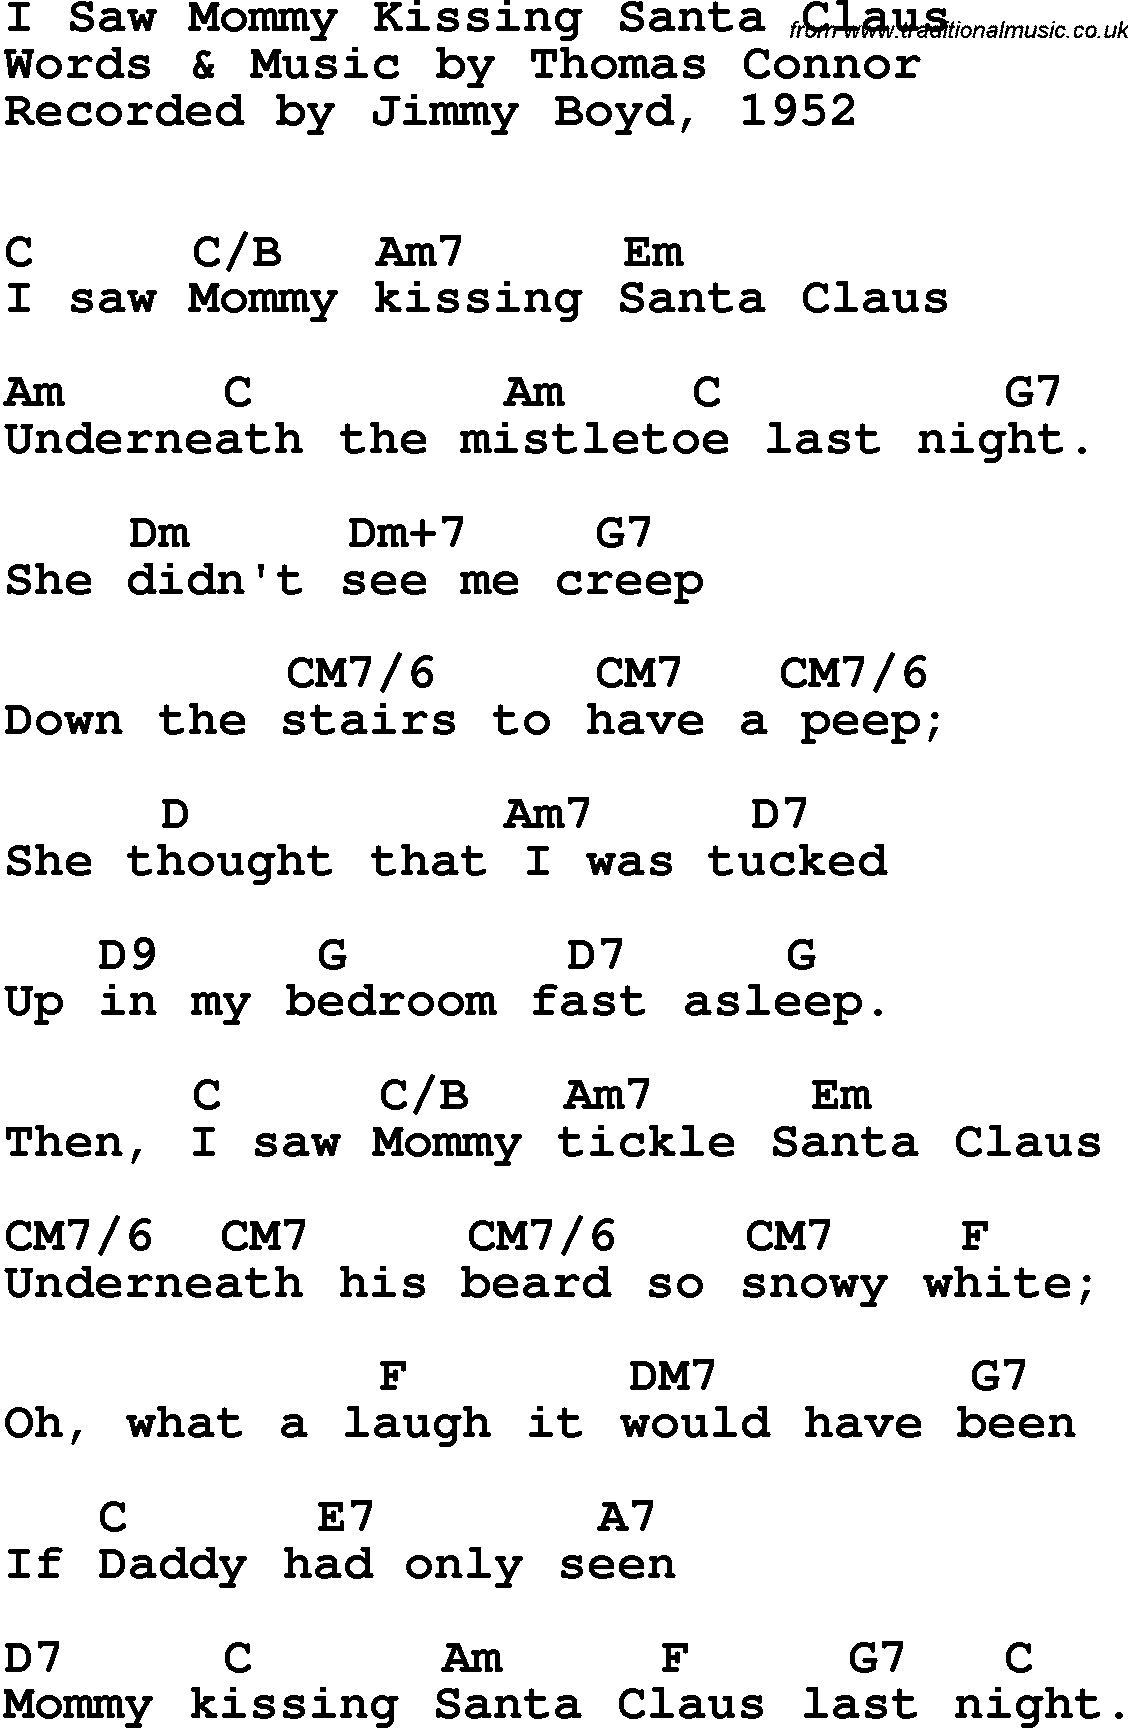 Song Lyrics with guitar chords for I Saw Mommy Kissing Santa Claus - Jimmy Boyd, 1952